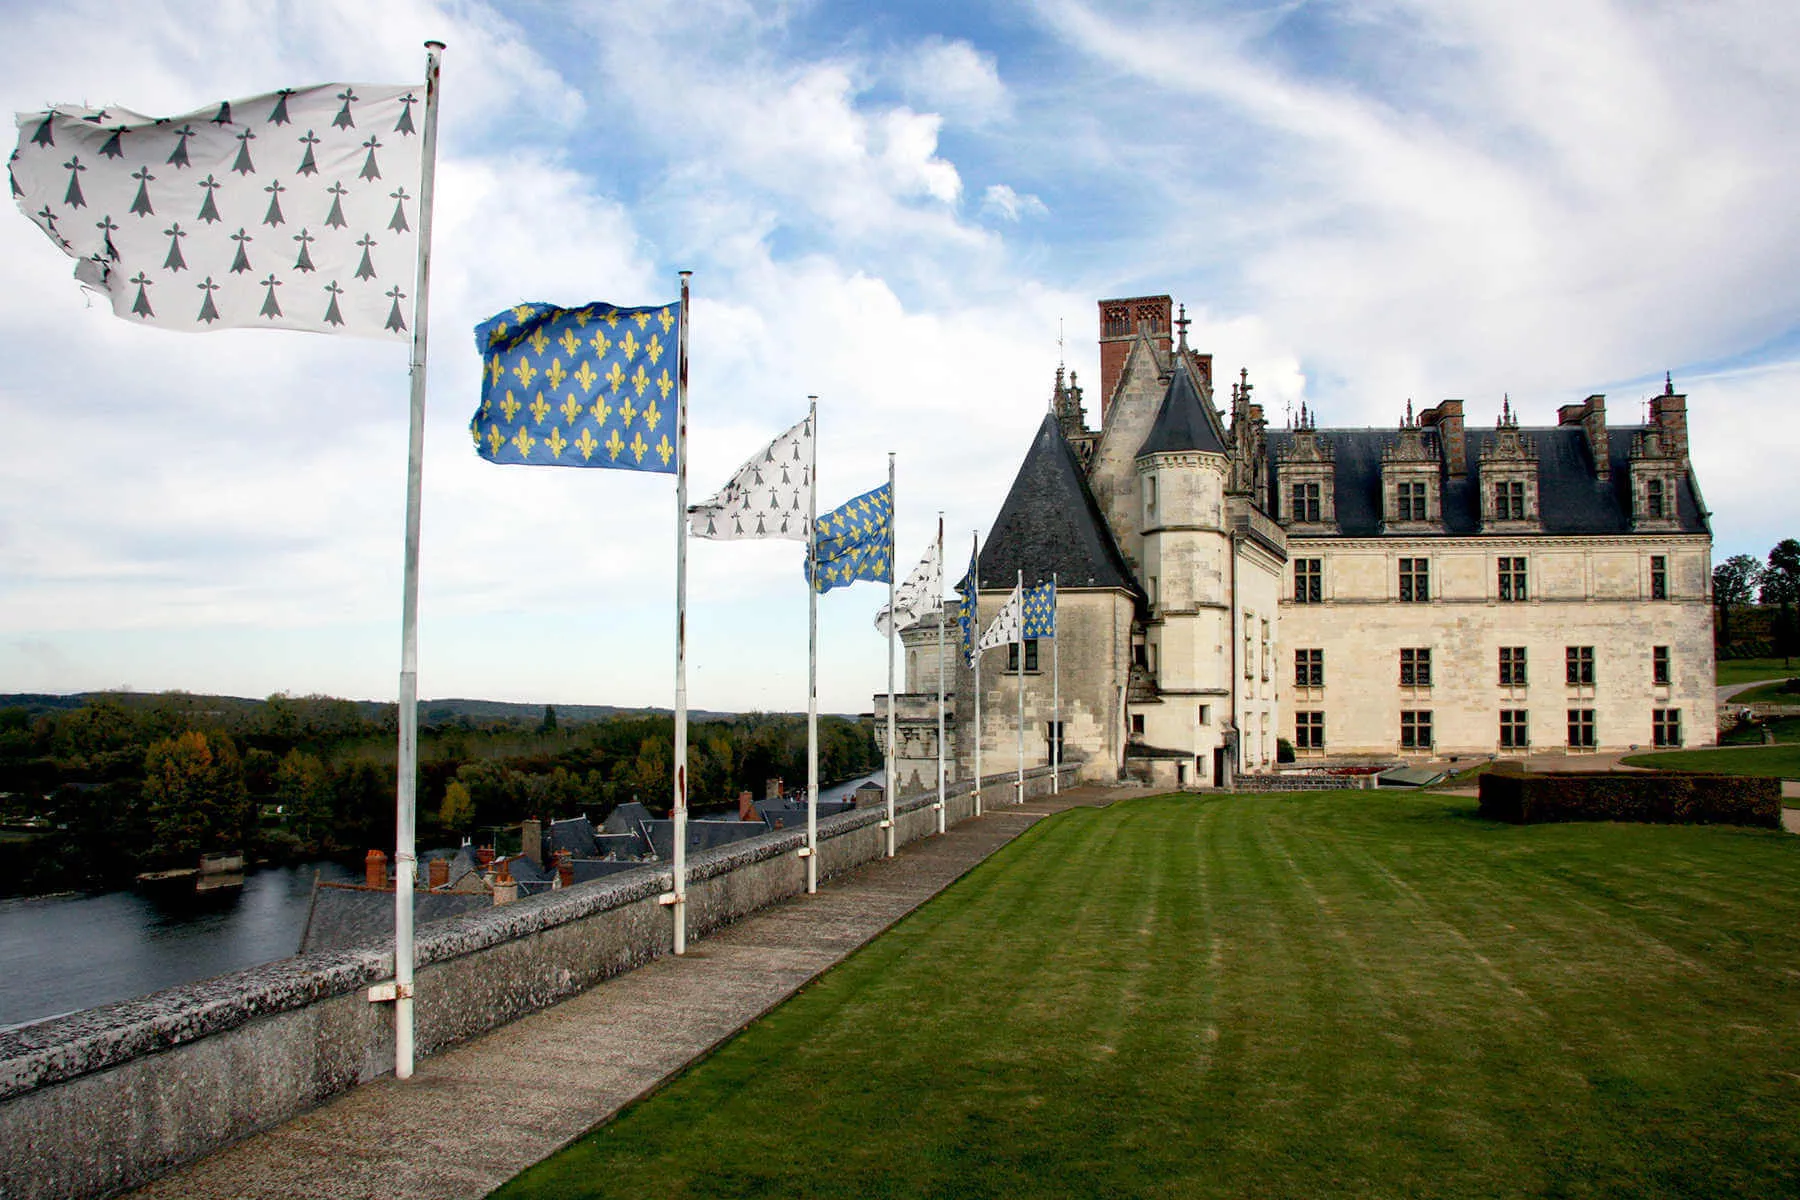 The Château d'Amboise, home to several French kings, was built on a strategic site next to the Loire RiverThe Château d'Amboise, home to several French kings, was built on a strategic site next to the Loire River